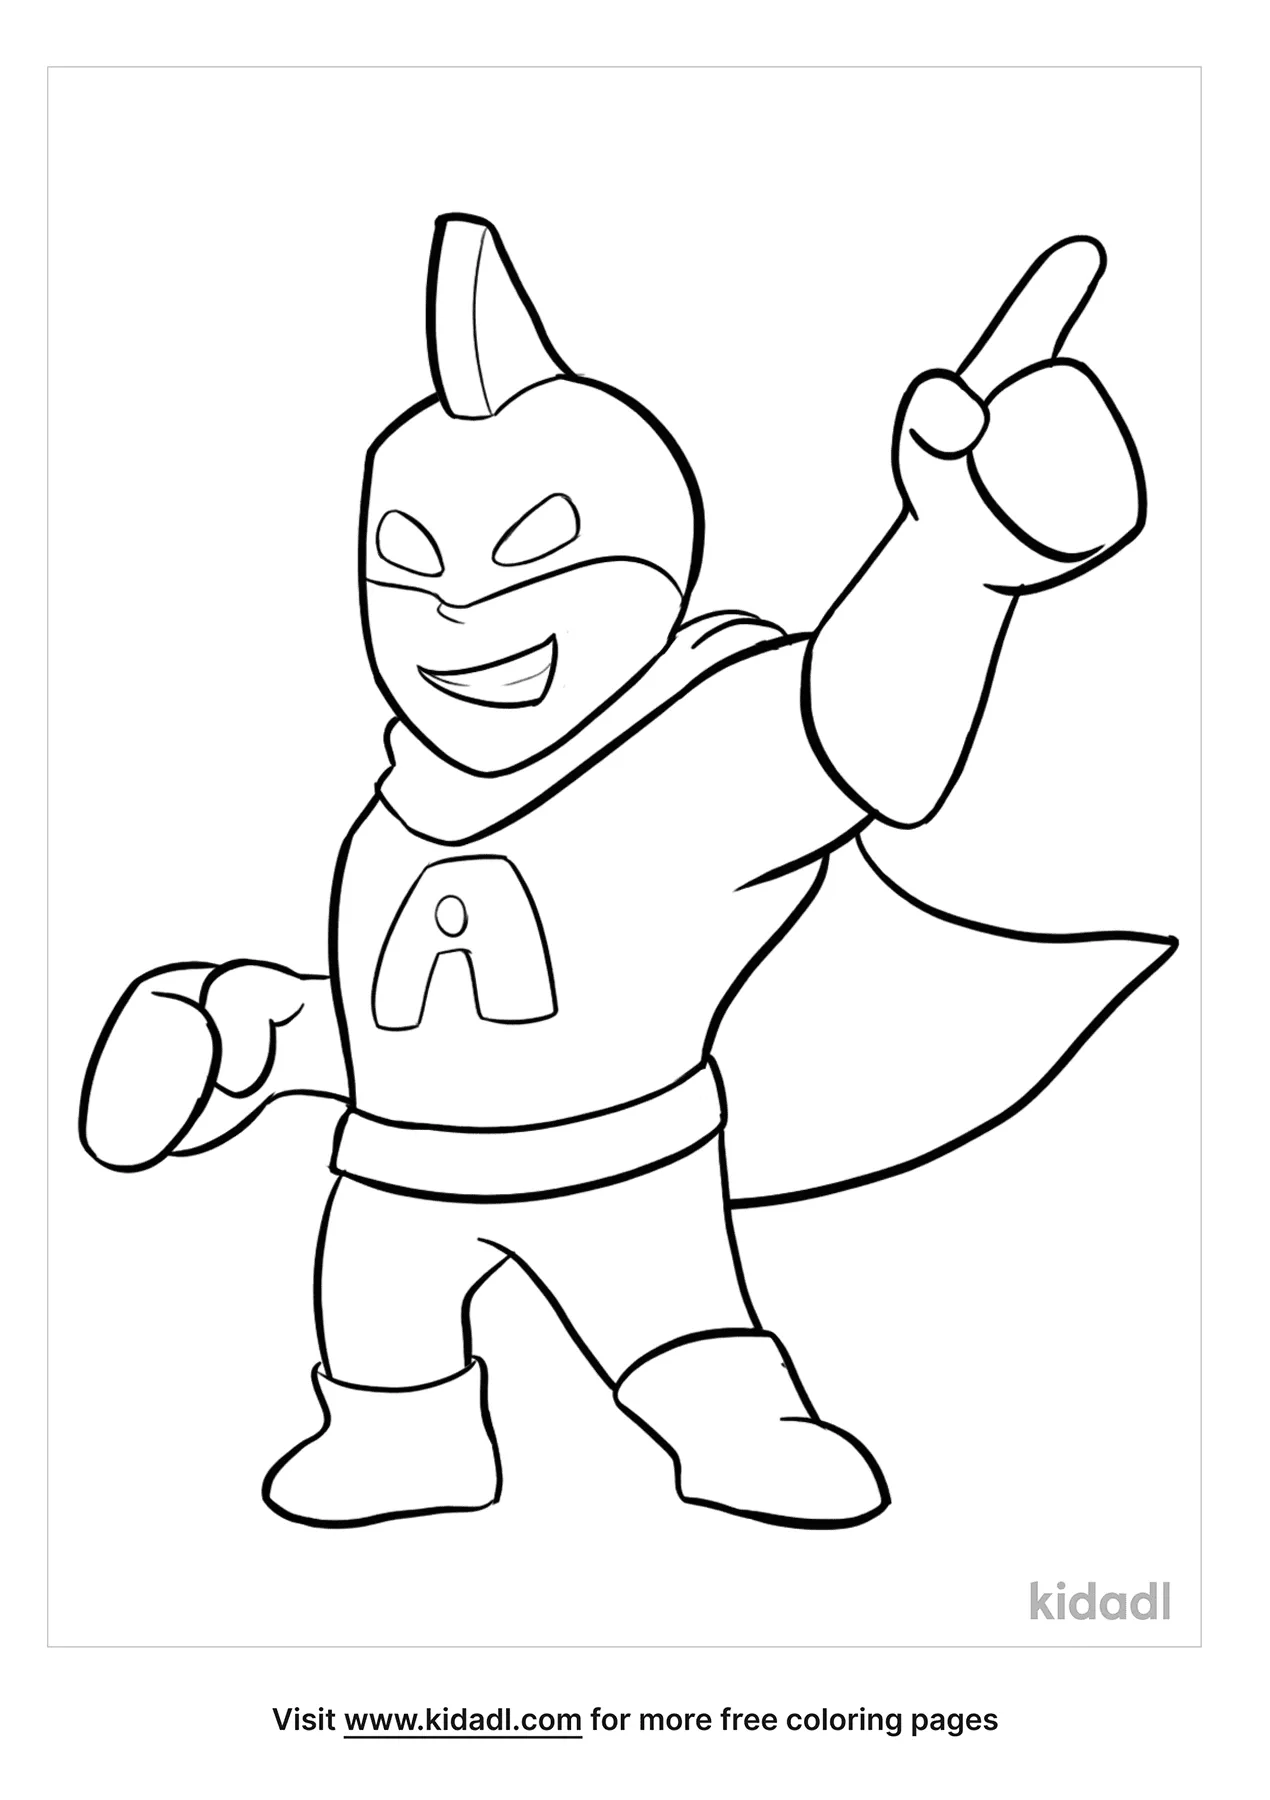 Boys' Coloring Pages   Free Boys Coloring Pages   Kidadl